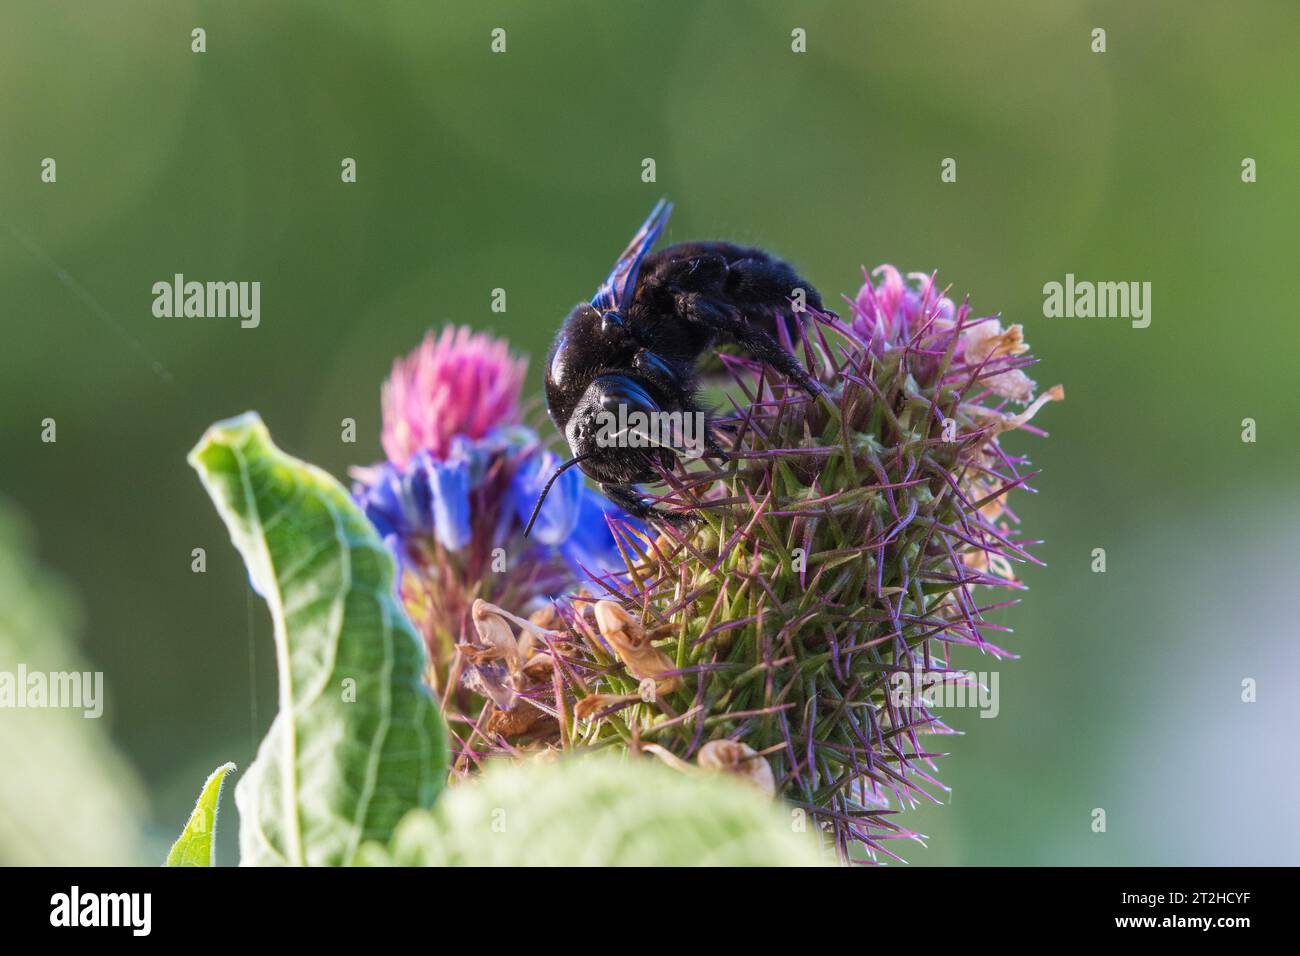 carpenter bee Xylocopa Latreille on a witches hat plant Pycnostachys urticifolia growing in Souther California, USA Stock Photo